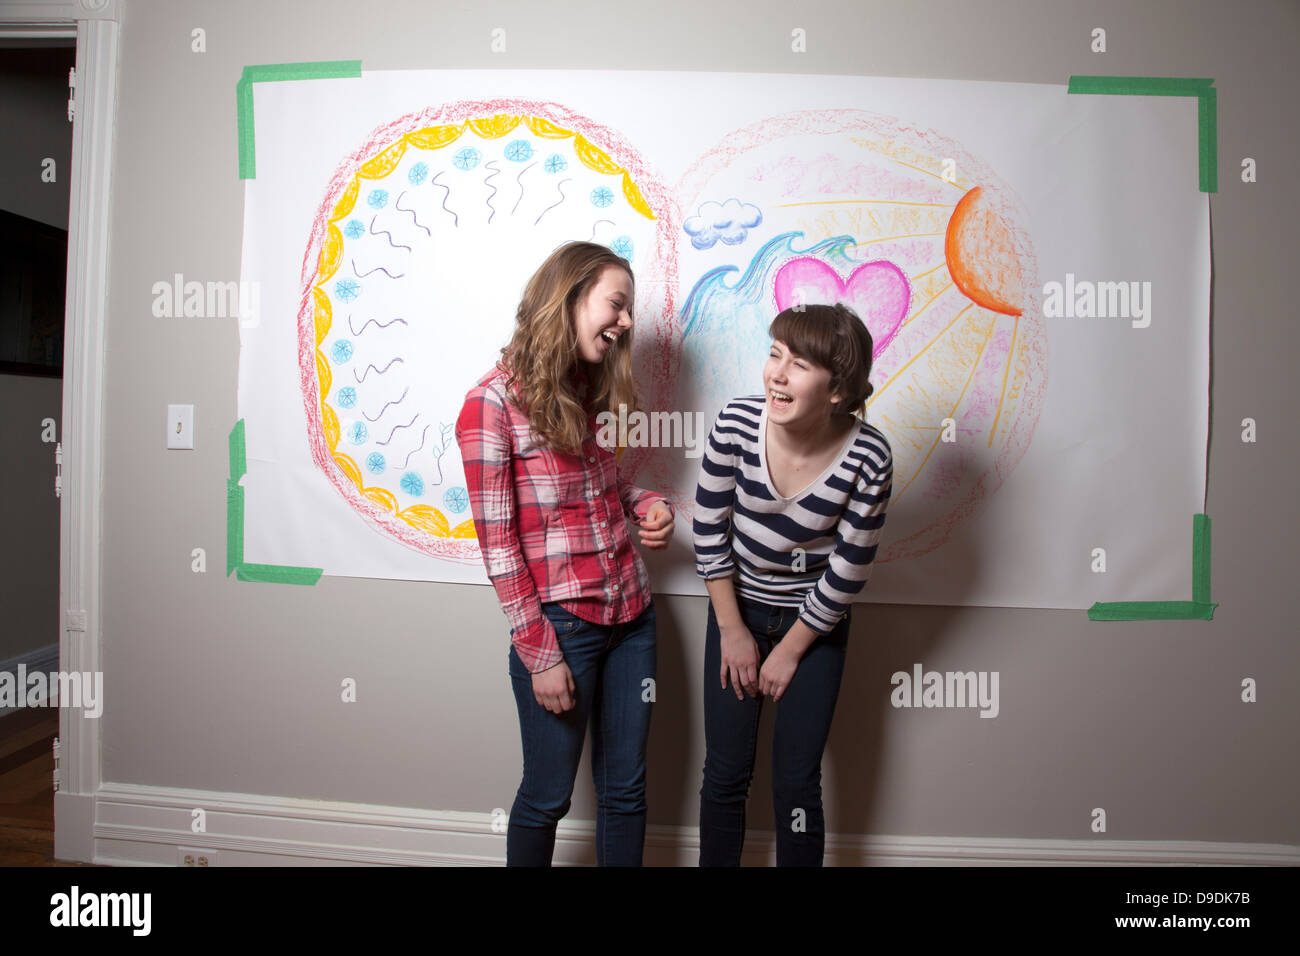 Girls standing in front of mural laughing Stock Photo